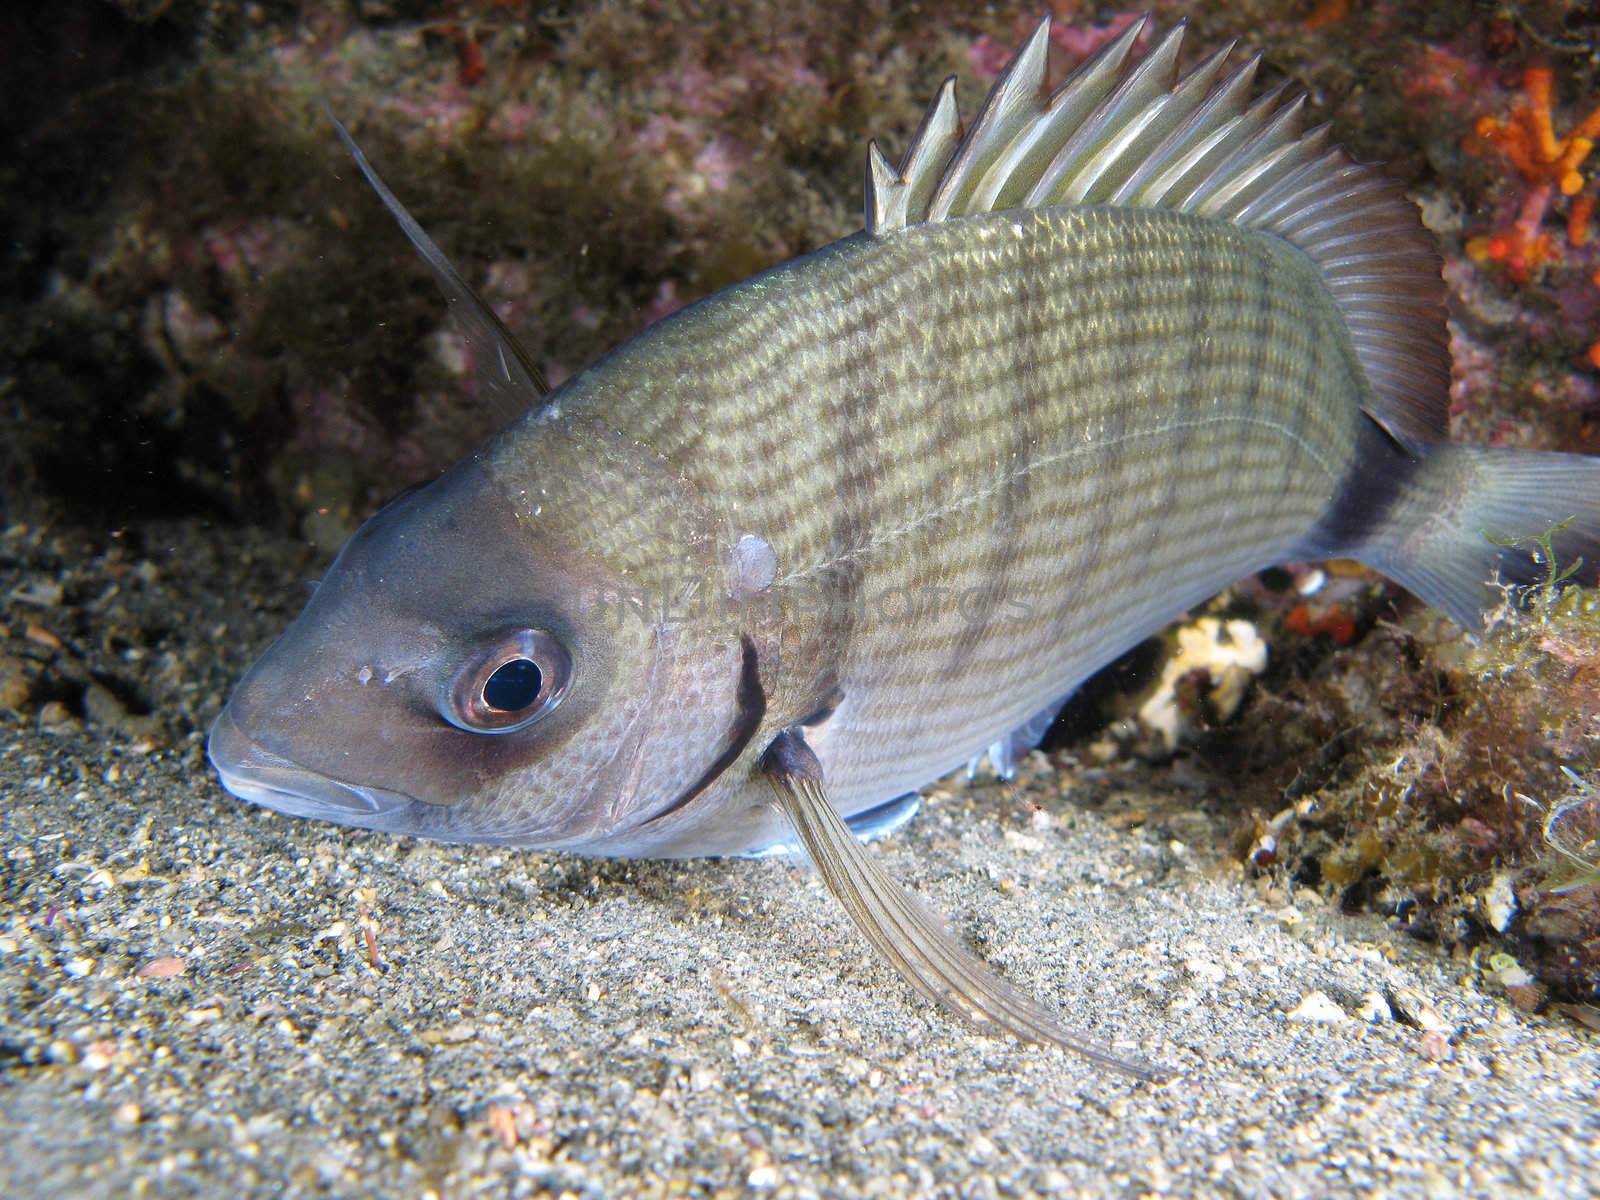 "Diplodus Sargus" fish shotted in the wild, nighttime.